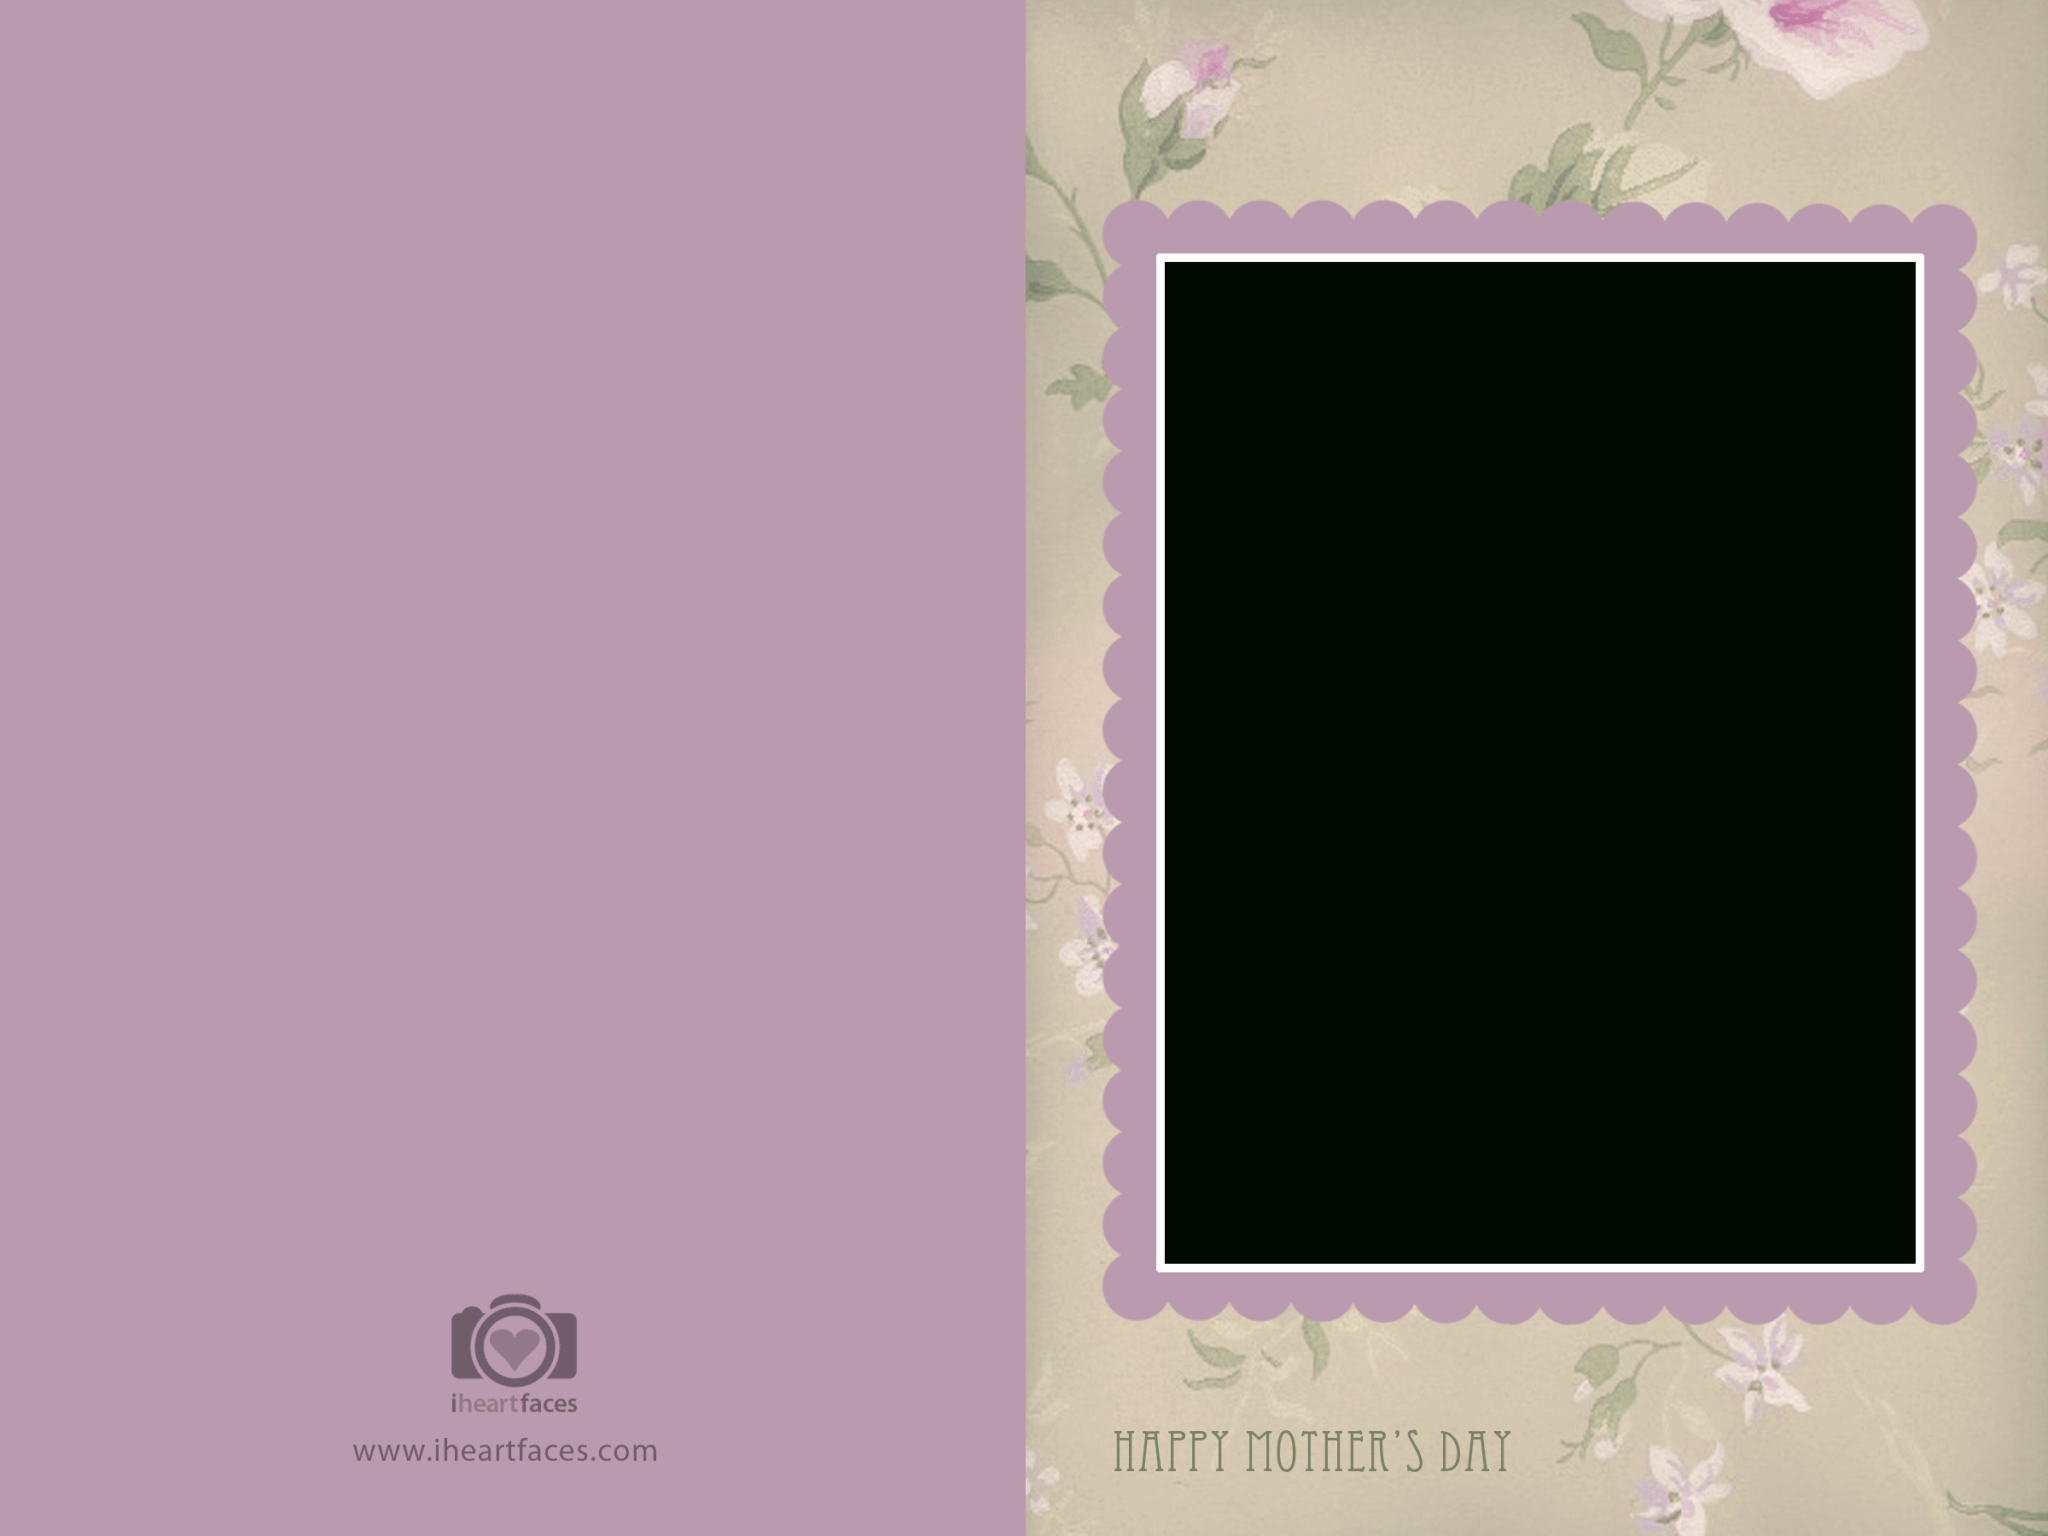 005-blank-greeting-card-template-photoshop-ideas-intended-for-free-printable-blank-greeting-card